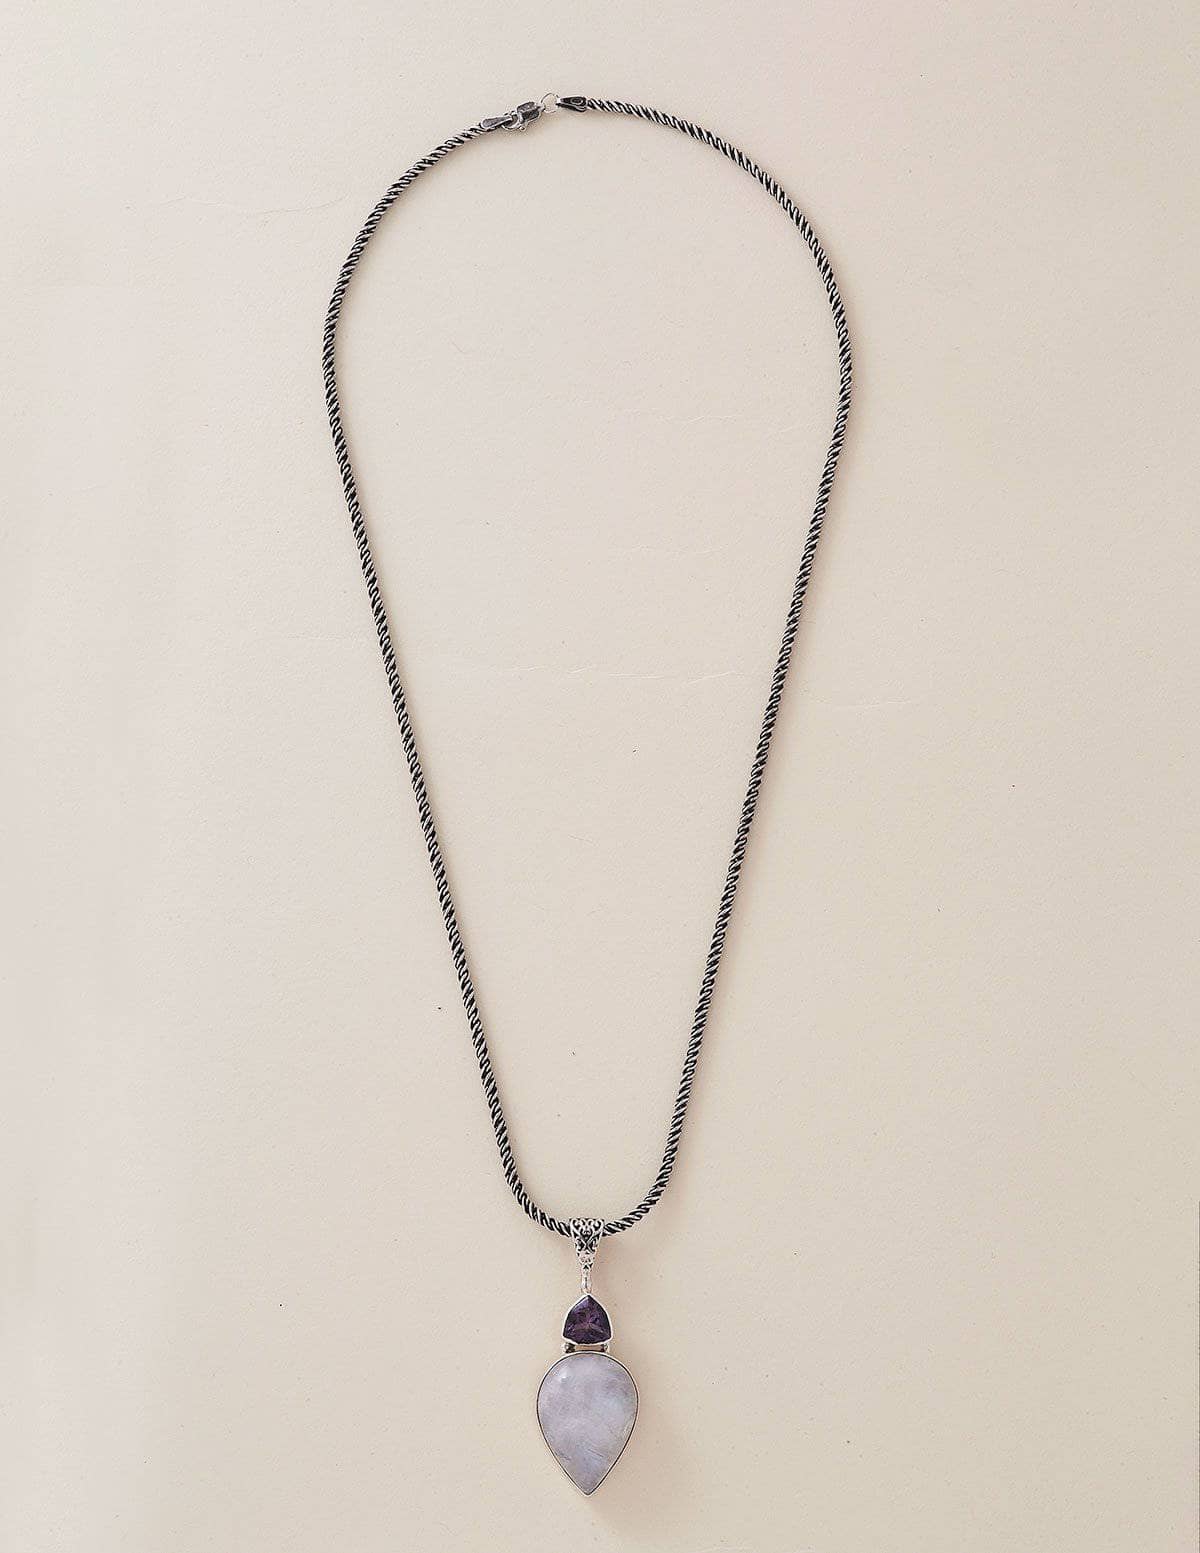 Moonstone and Amethyst Vintage Necklace - One of a Kind